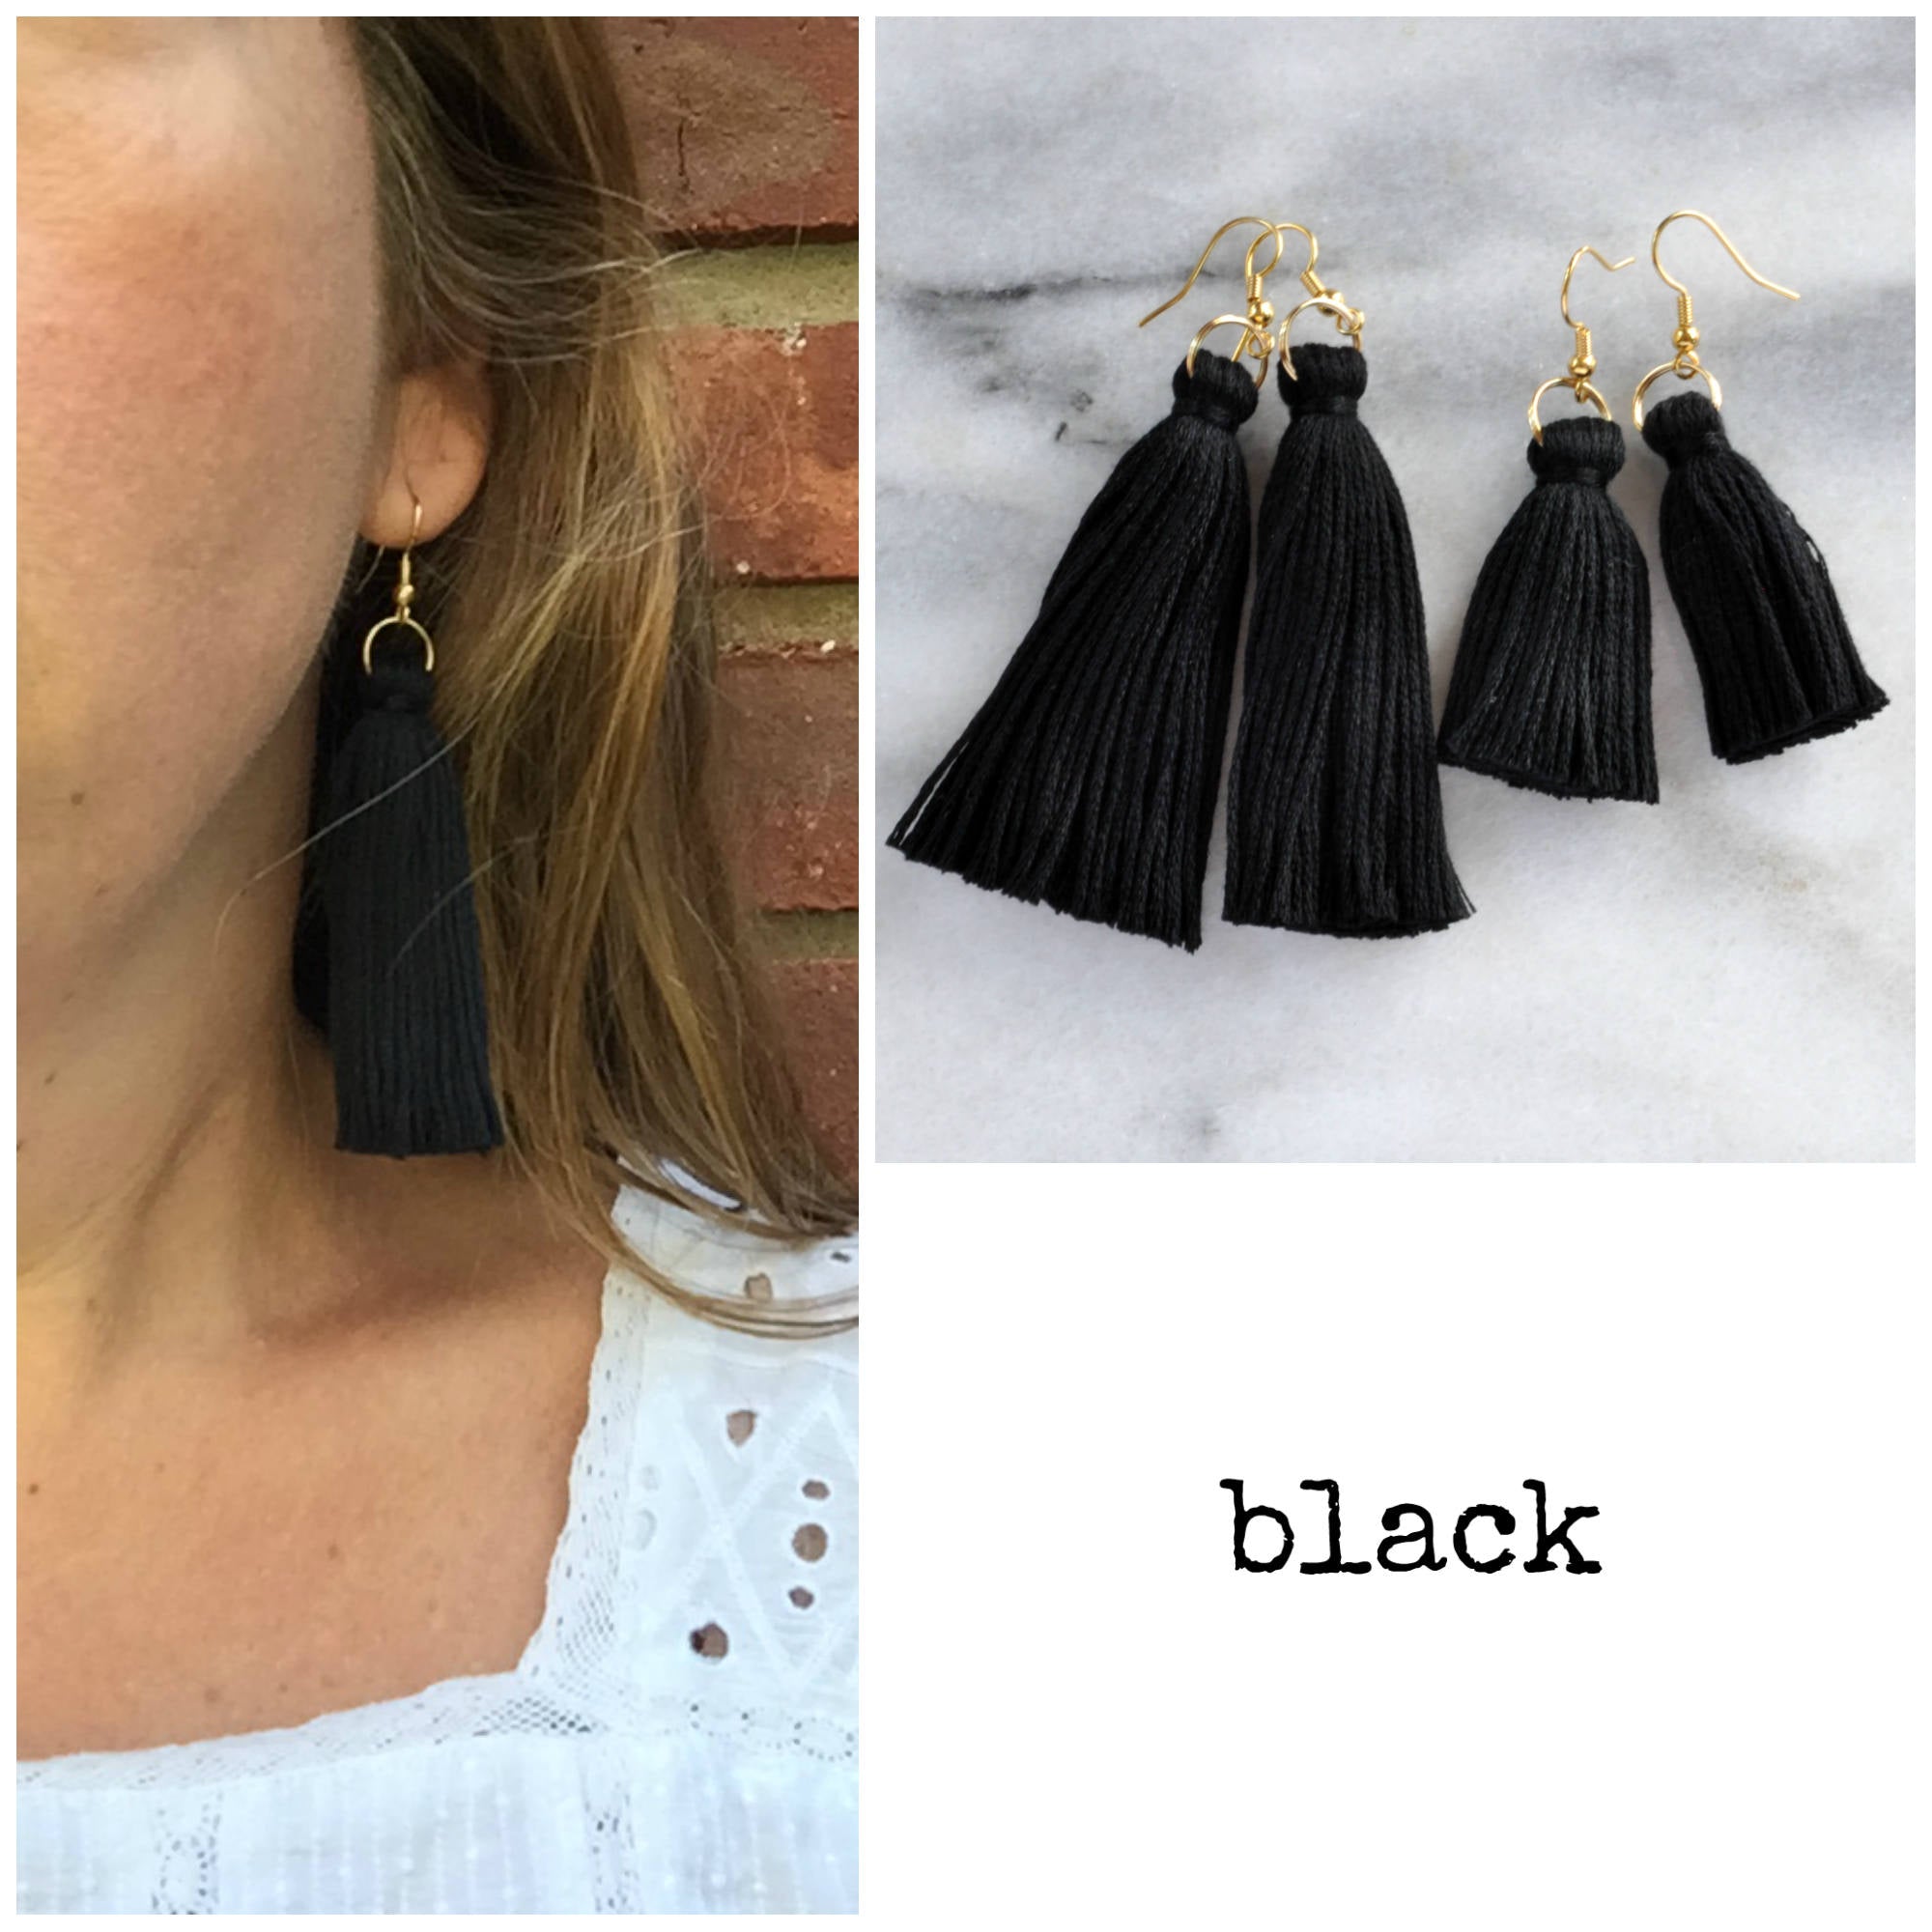 Libby & Smee black tassel earrings in mini and long, still life and long on model